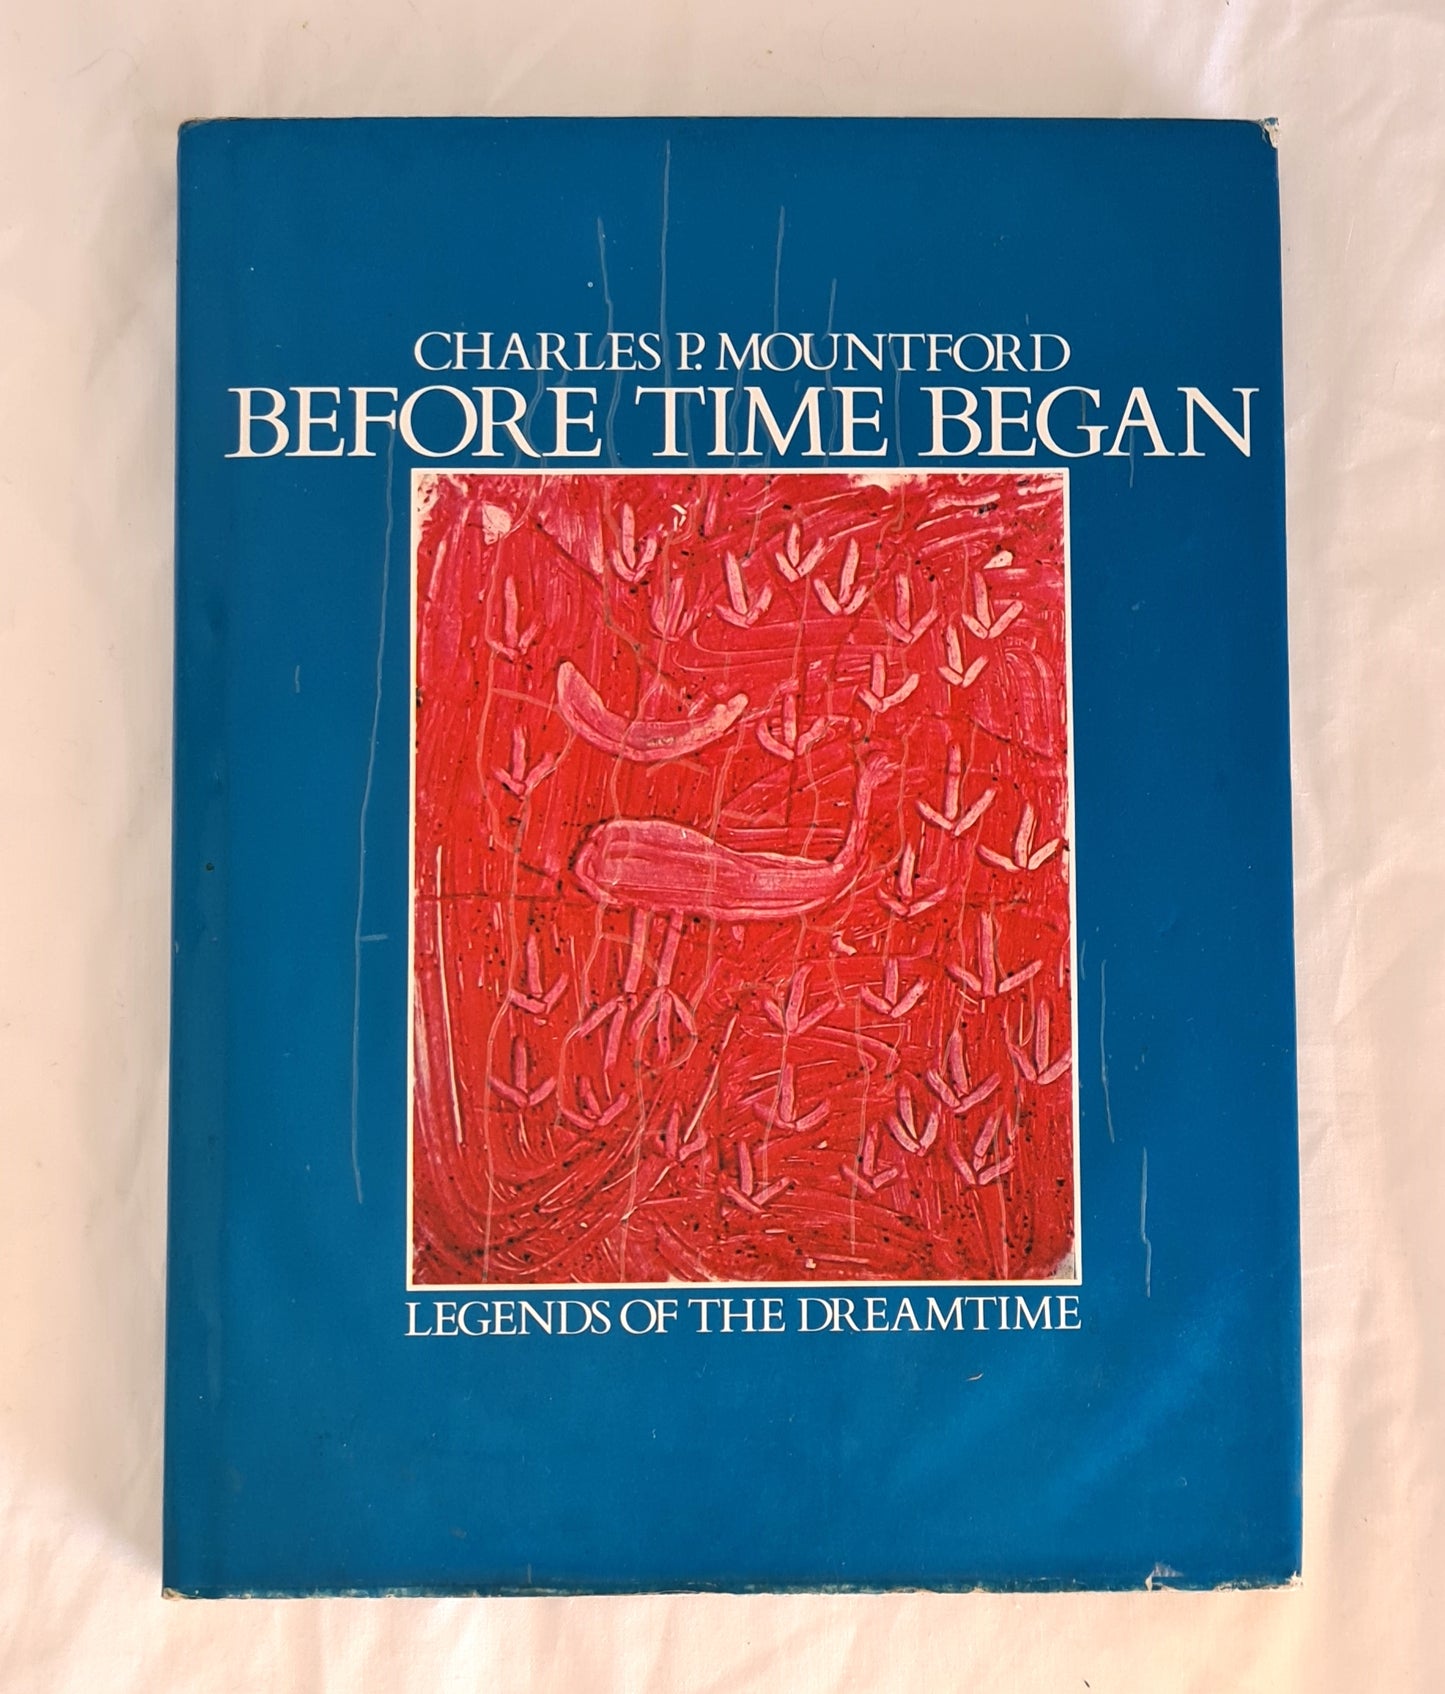 Before Time Began  Legends of the Dreamtime  by Charles P. Mountford